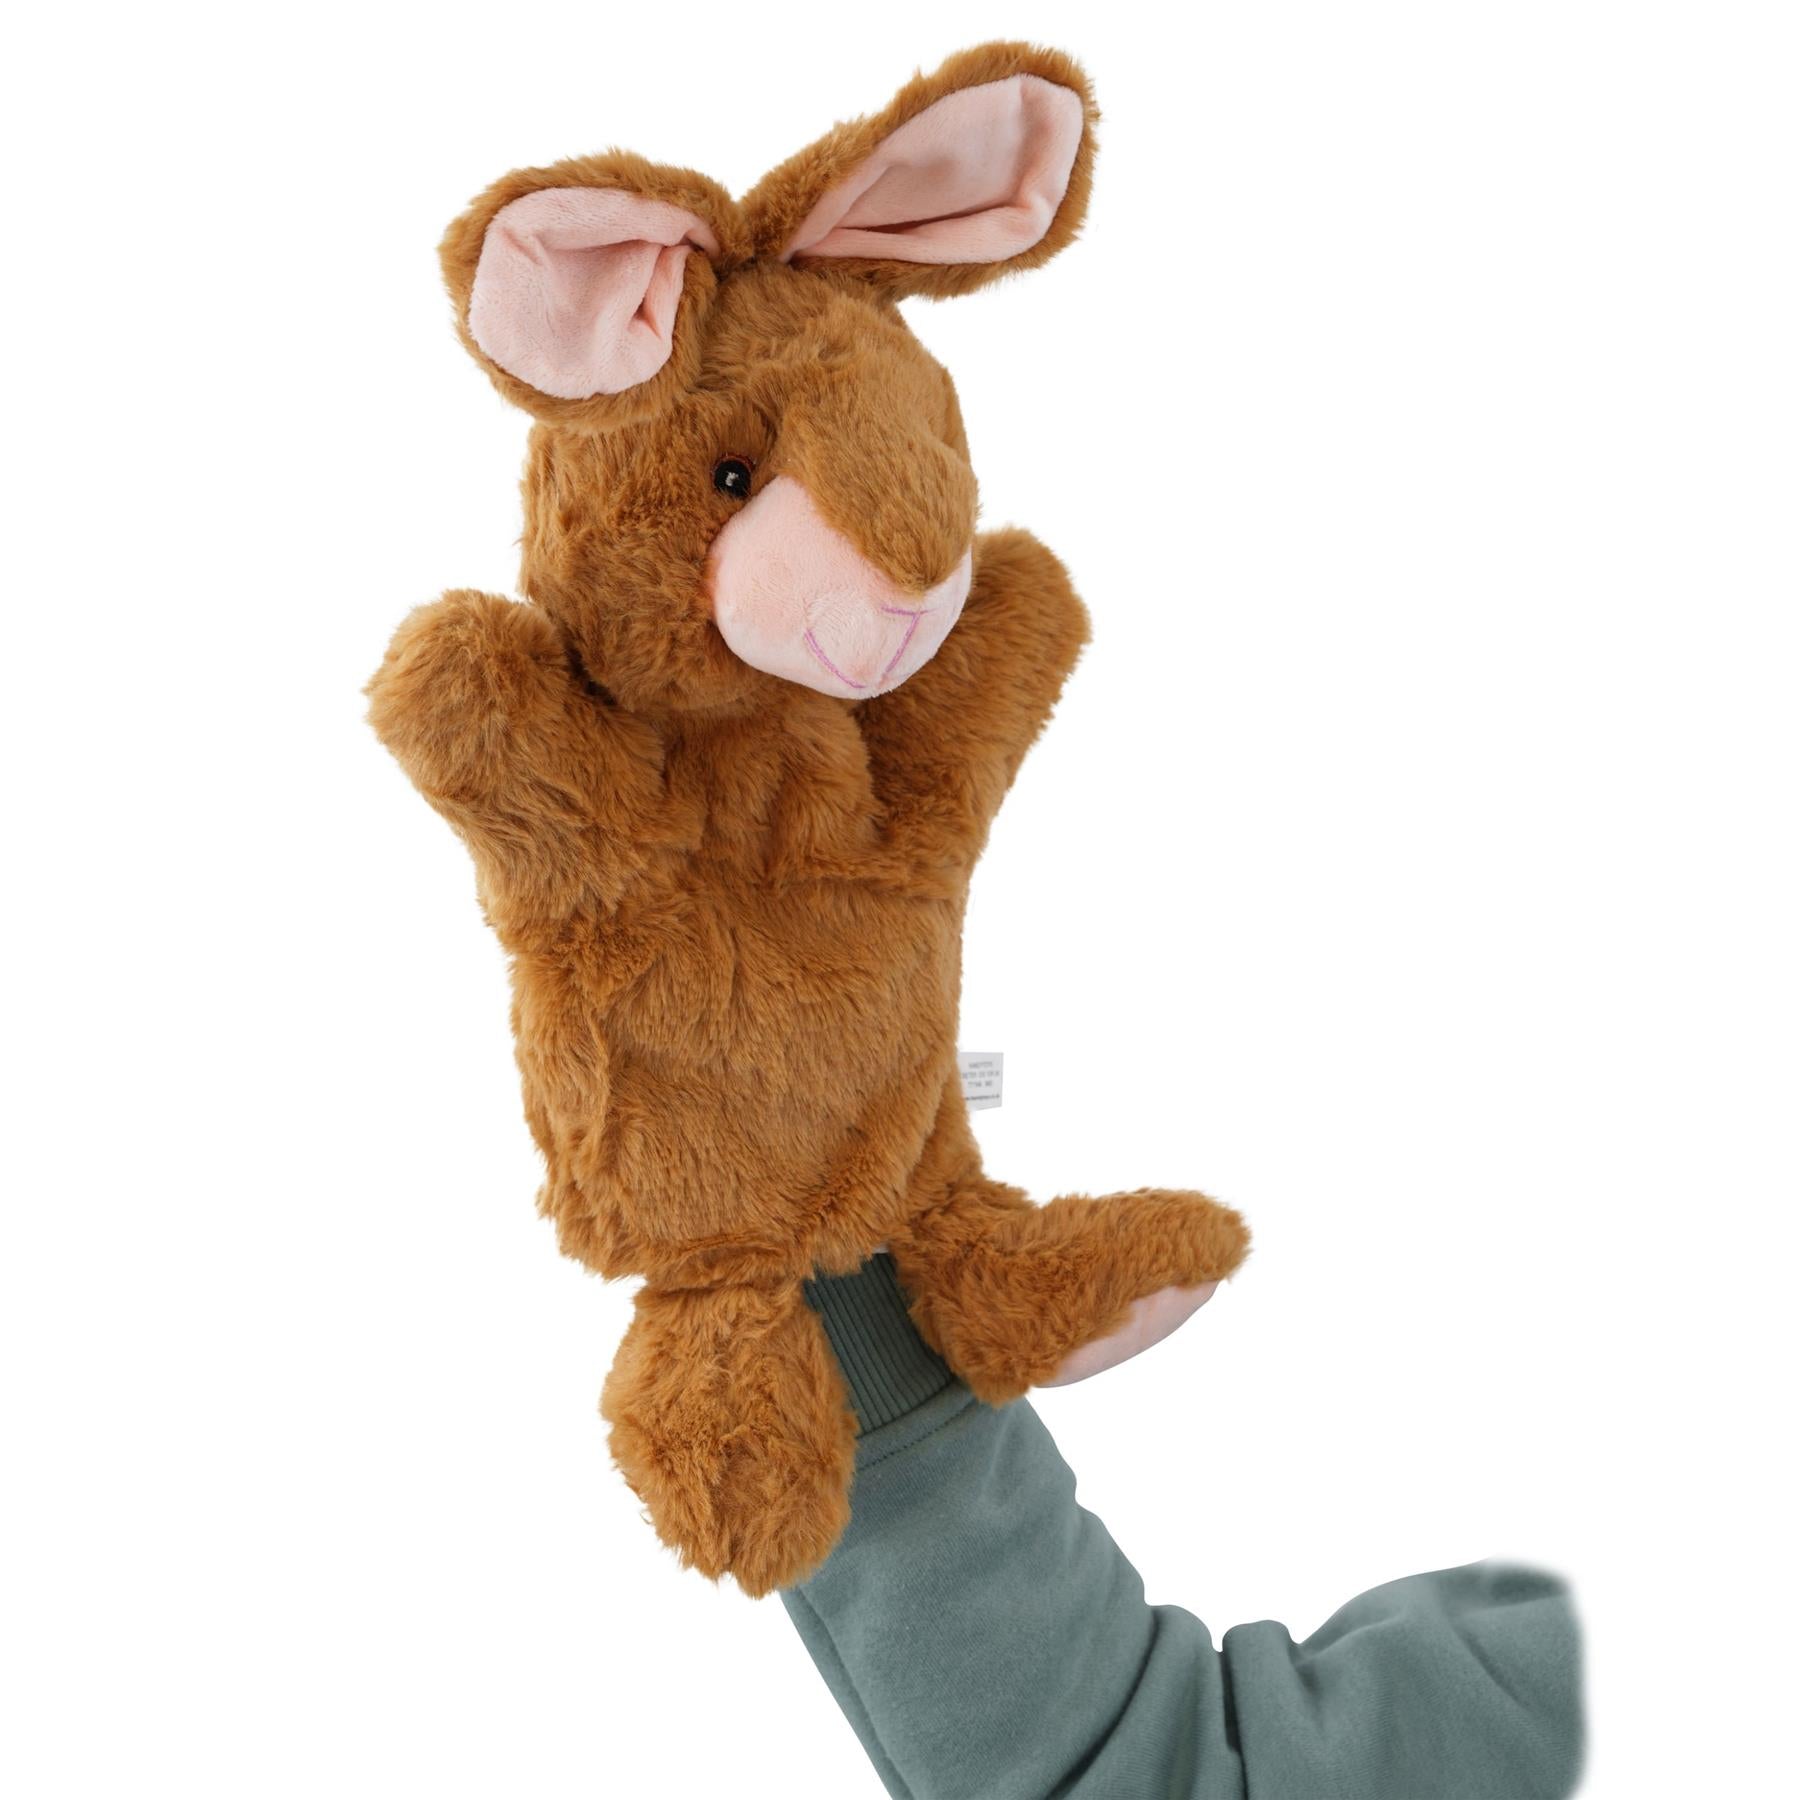 HAND PUPPETS by The Magic Toy Shop - UKBuyZone